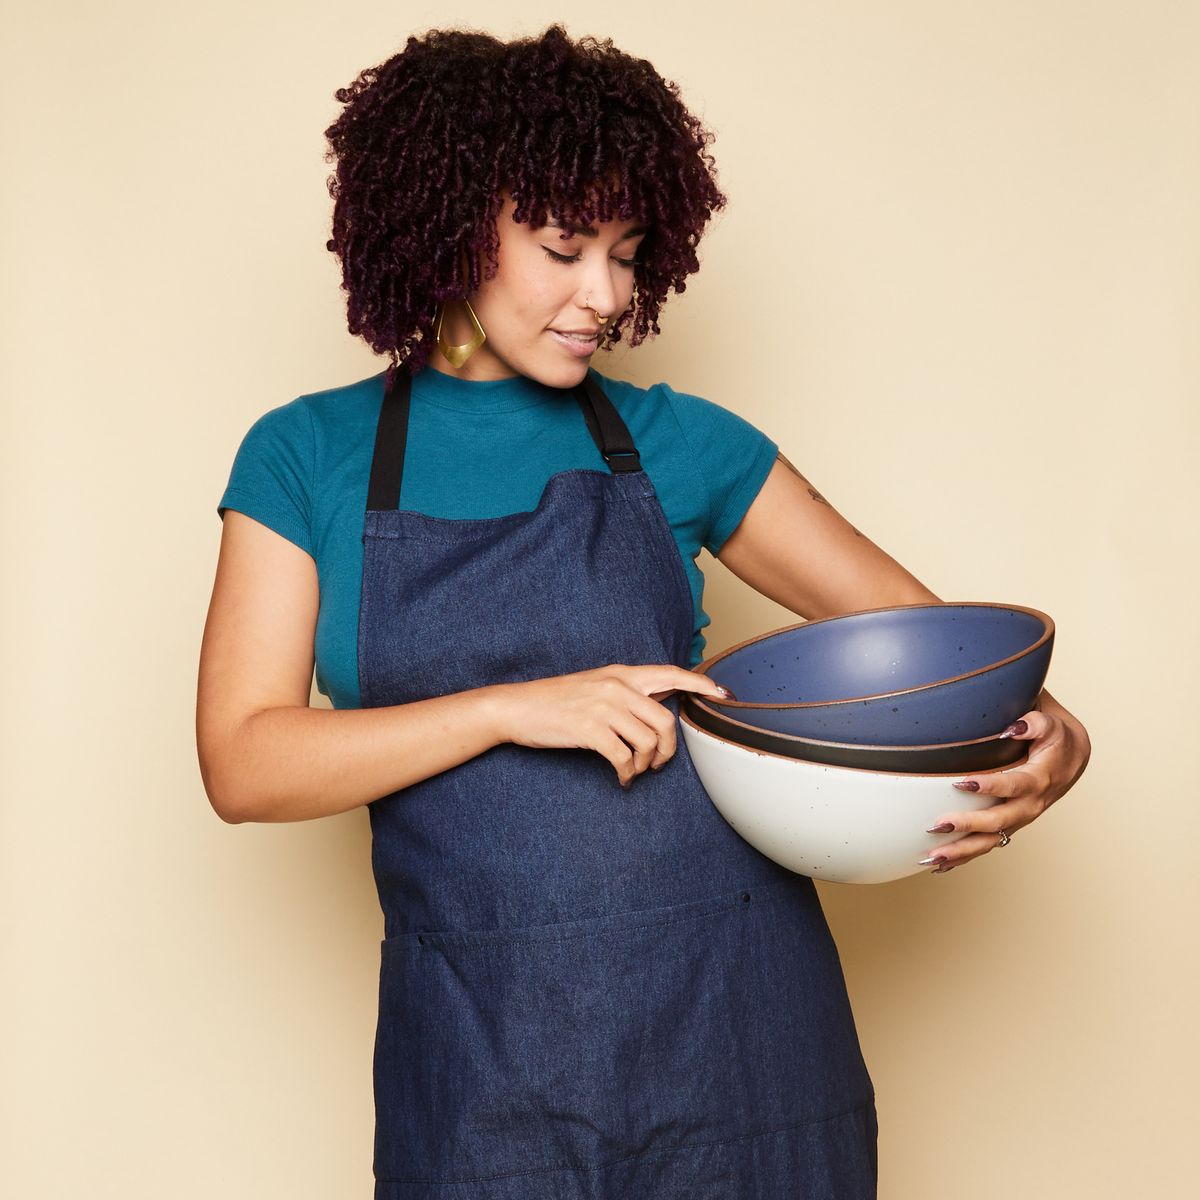 Woman looking down and smiling wearing a blue shirt with a denim blue apron over it and carrying 3 mixing bowls.